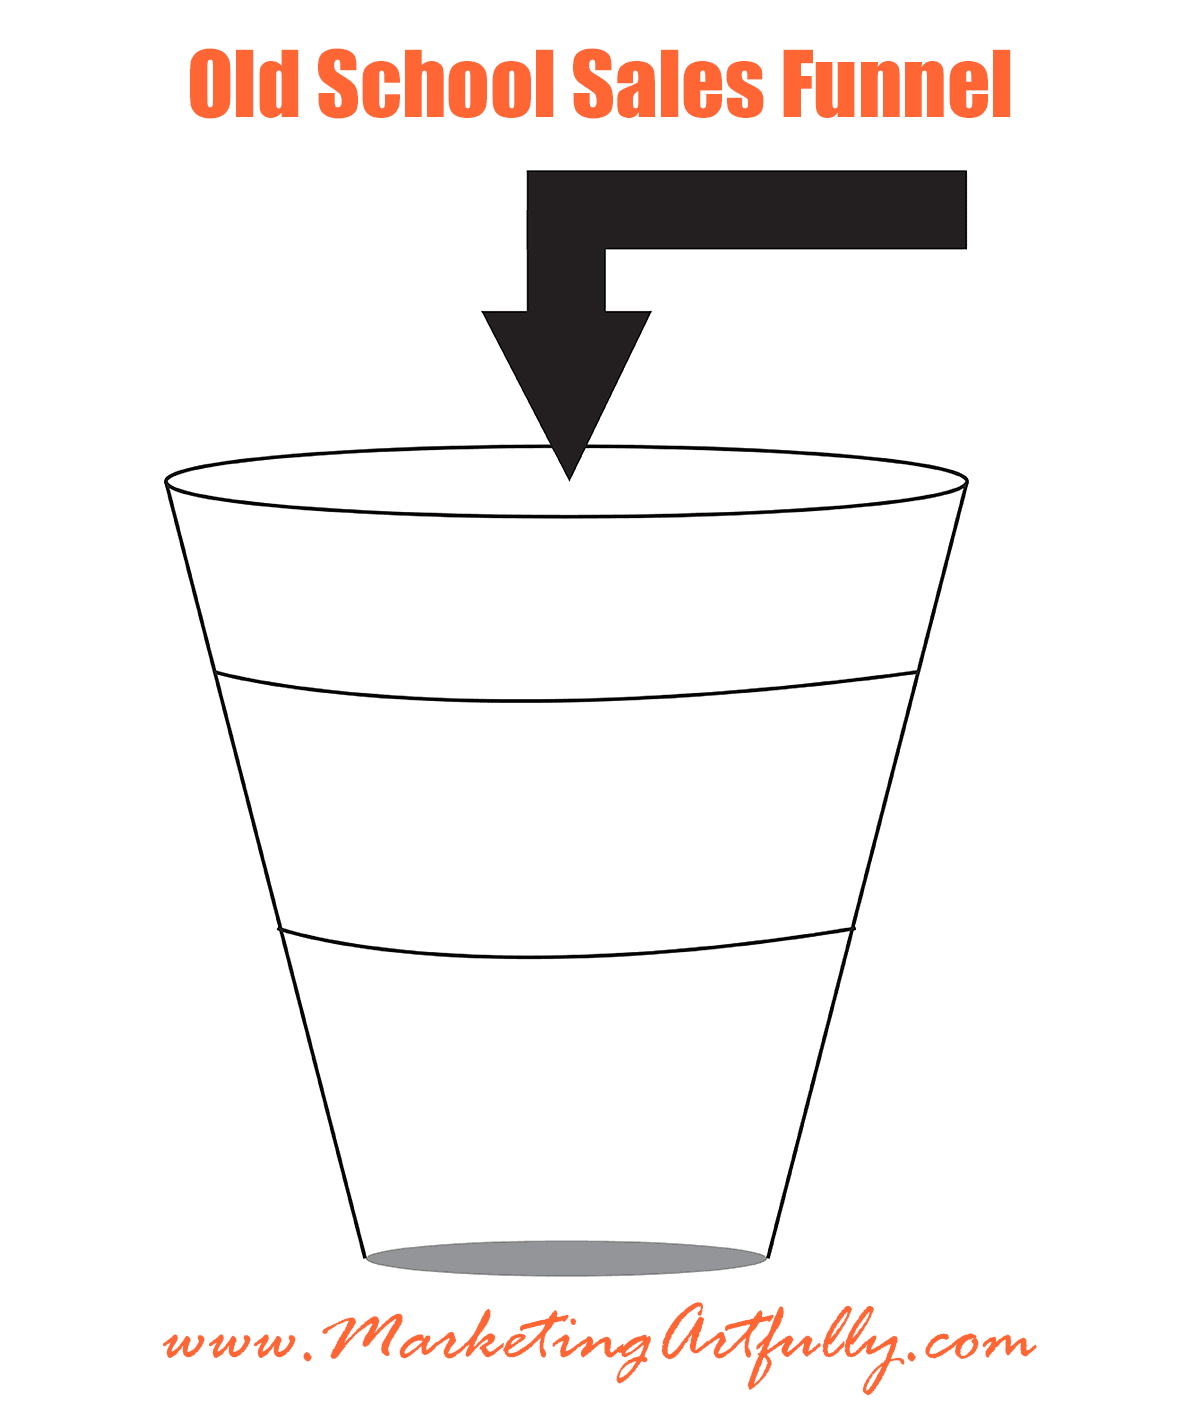 The Old School Sales Funnel